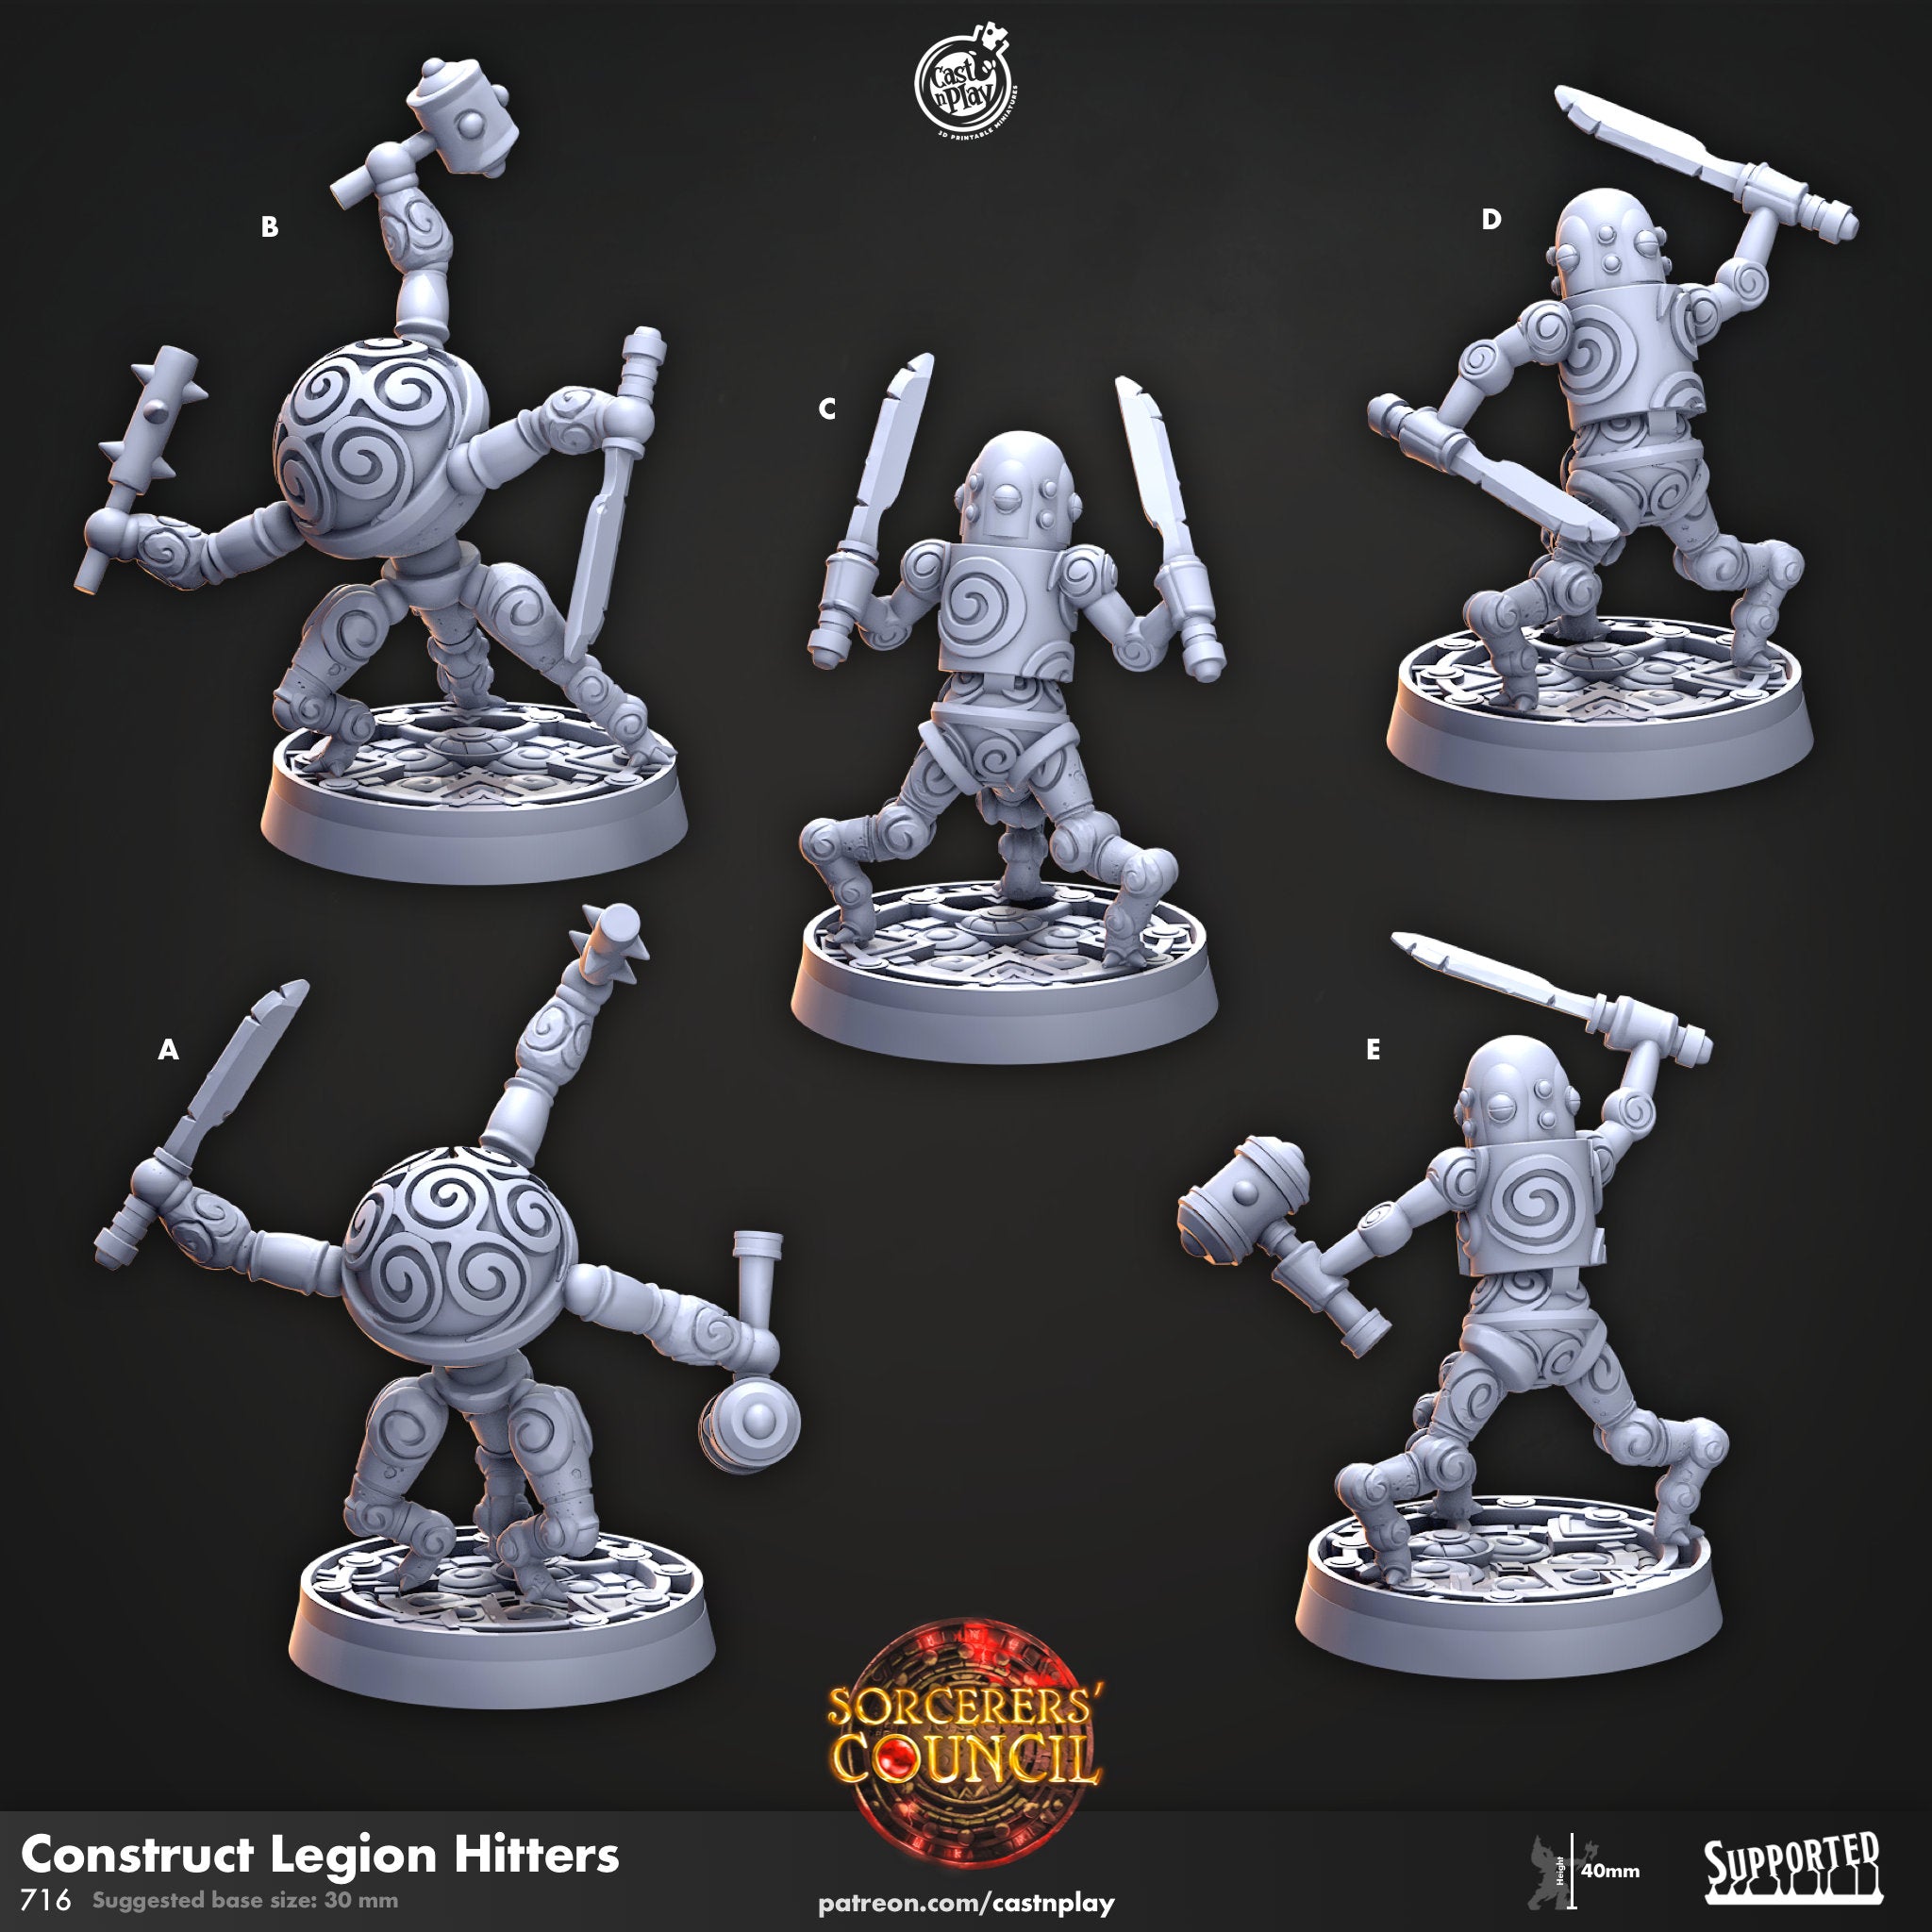 Construct Legion Hitters by Cast N Play (Sorcerer's Council)